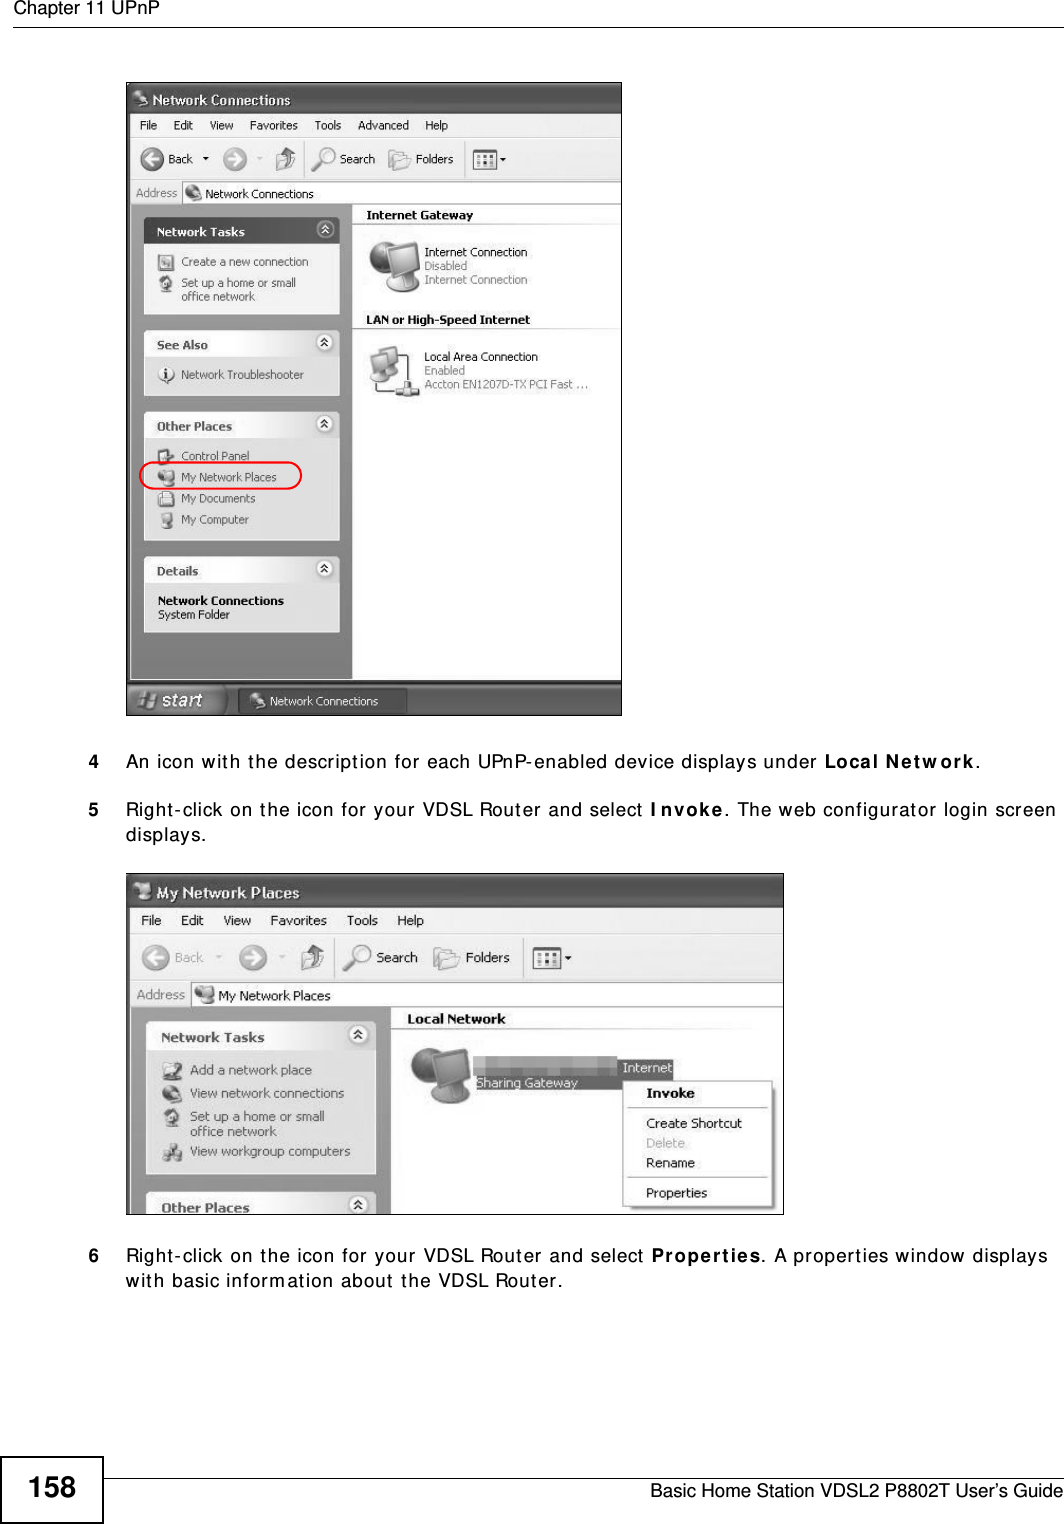 Chapter 11 UPnPBasic Home Station VDSL2 P8802T User’s Guide158Network Co nnections4An icon wit h the description for each UPnP- enabled device displays under Local N etw ork. 5Right-click on the icon for your VDSL Router and select  I nvoke . The web configurator login screen displays. Network Co nnections: My Netw ork Places6Right-click on the icon for your VDSL Rout er and select  Prope r t ie s. A properties window displays with basic inform ation about t he VDSL Router. 